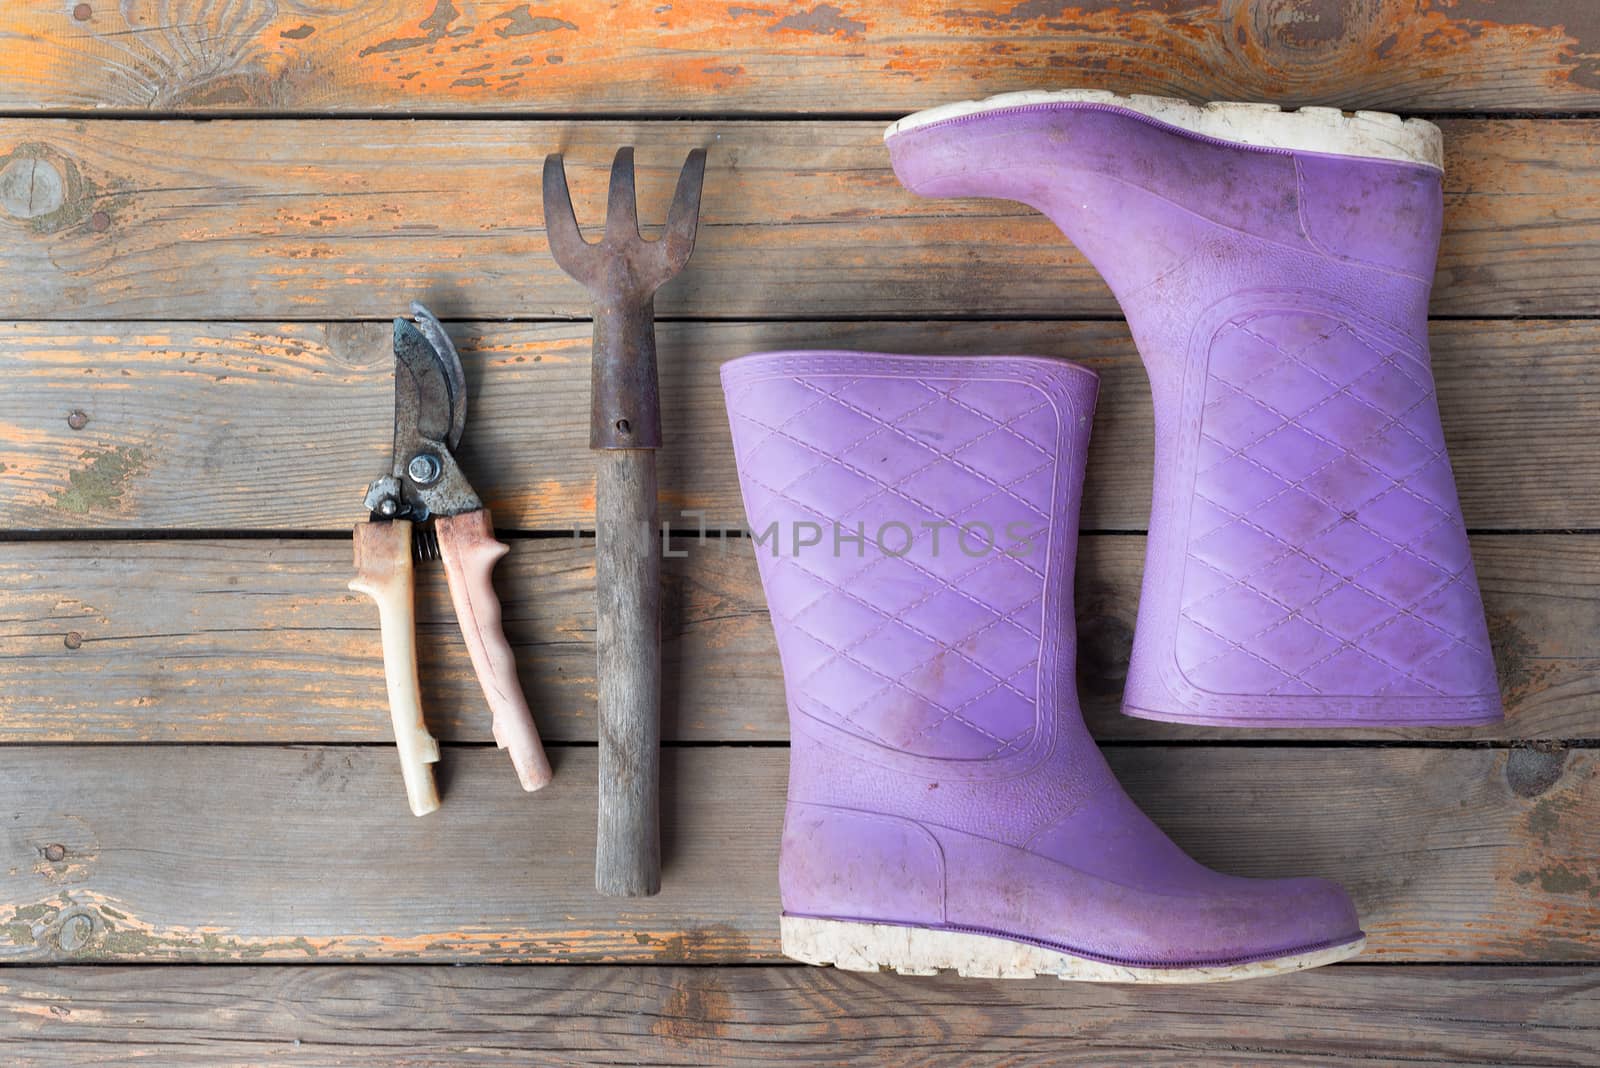 Old wooden texture background with tools and wellingtons, close up view